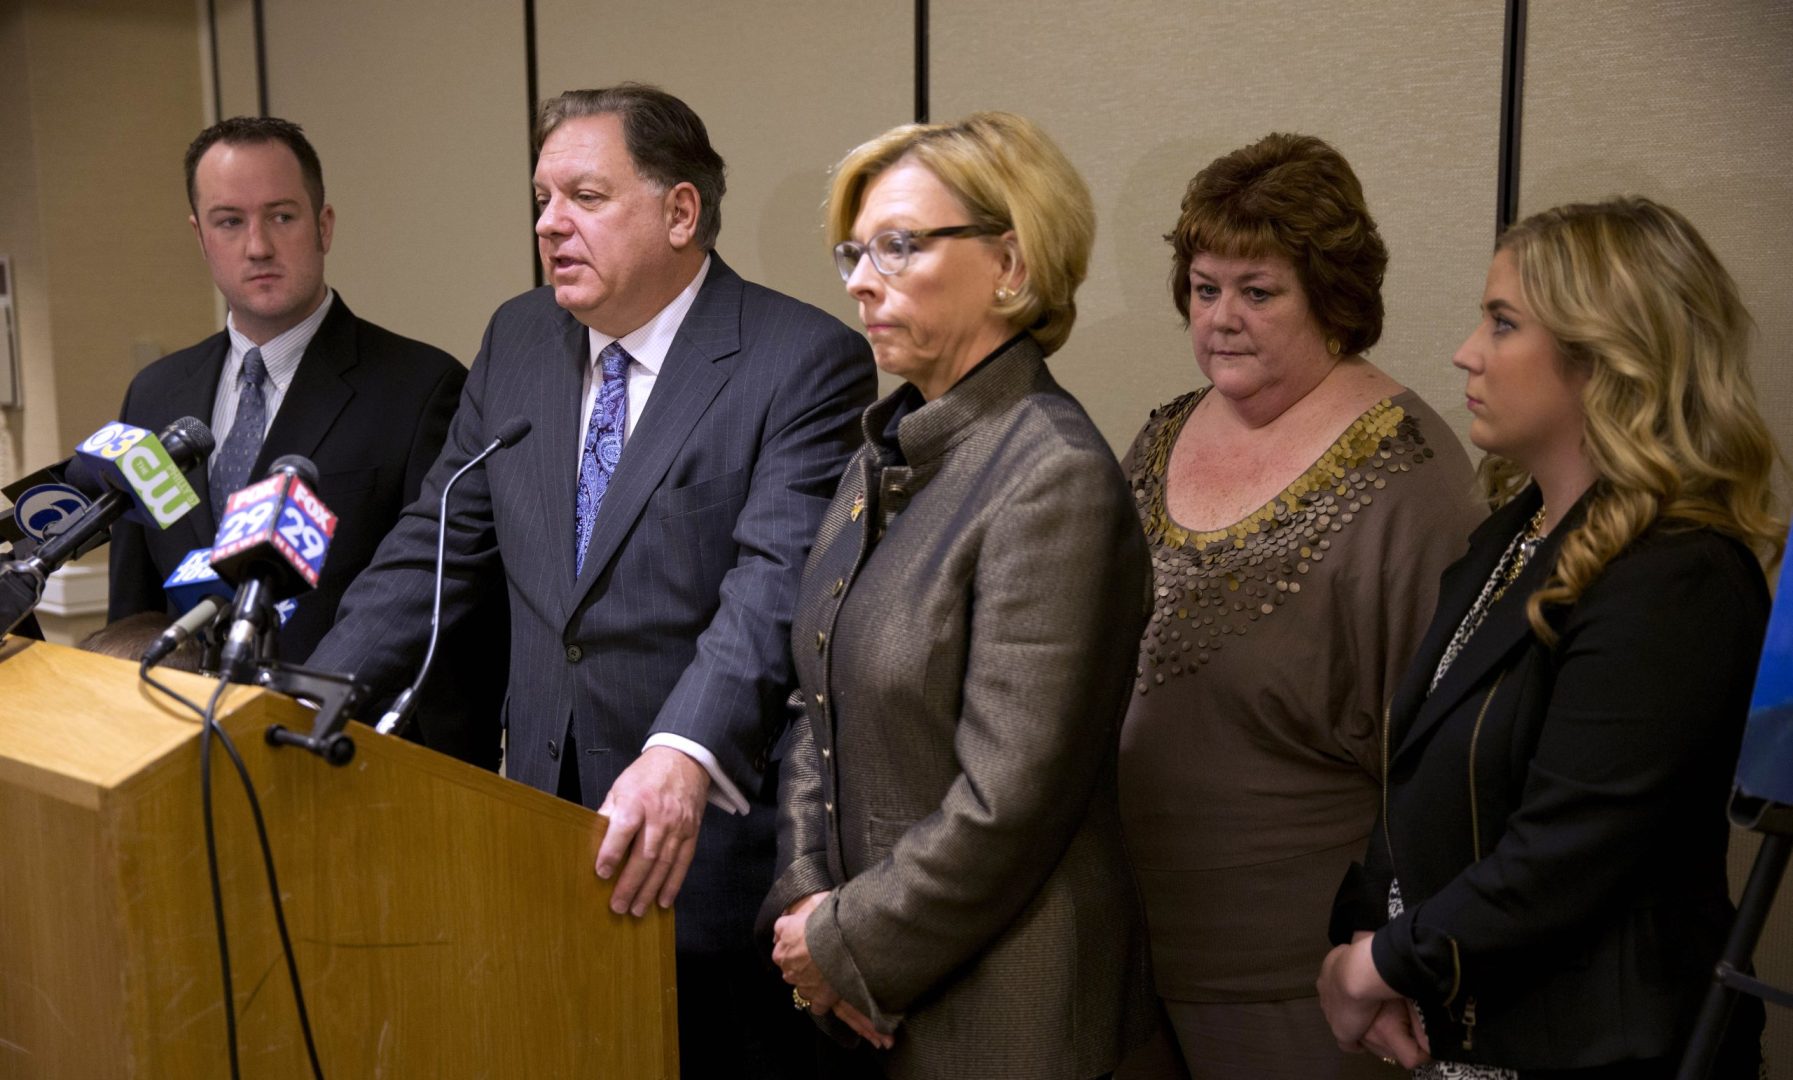 FILE -Attorneys Dan Monahan, at podium, and Marcia Hamilton, center right, take part during a news conference with the family of Sean McIlmail, brother Michael McIlmail, left, mother Debbie McIlmail, second right, and sister Kaitlyn McIlmail Wednesday, Nov. 13, 2013, in Philadelphia. 